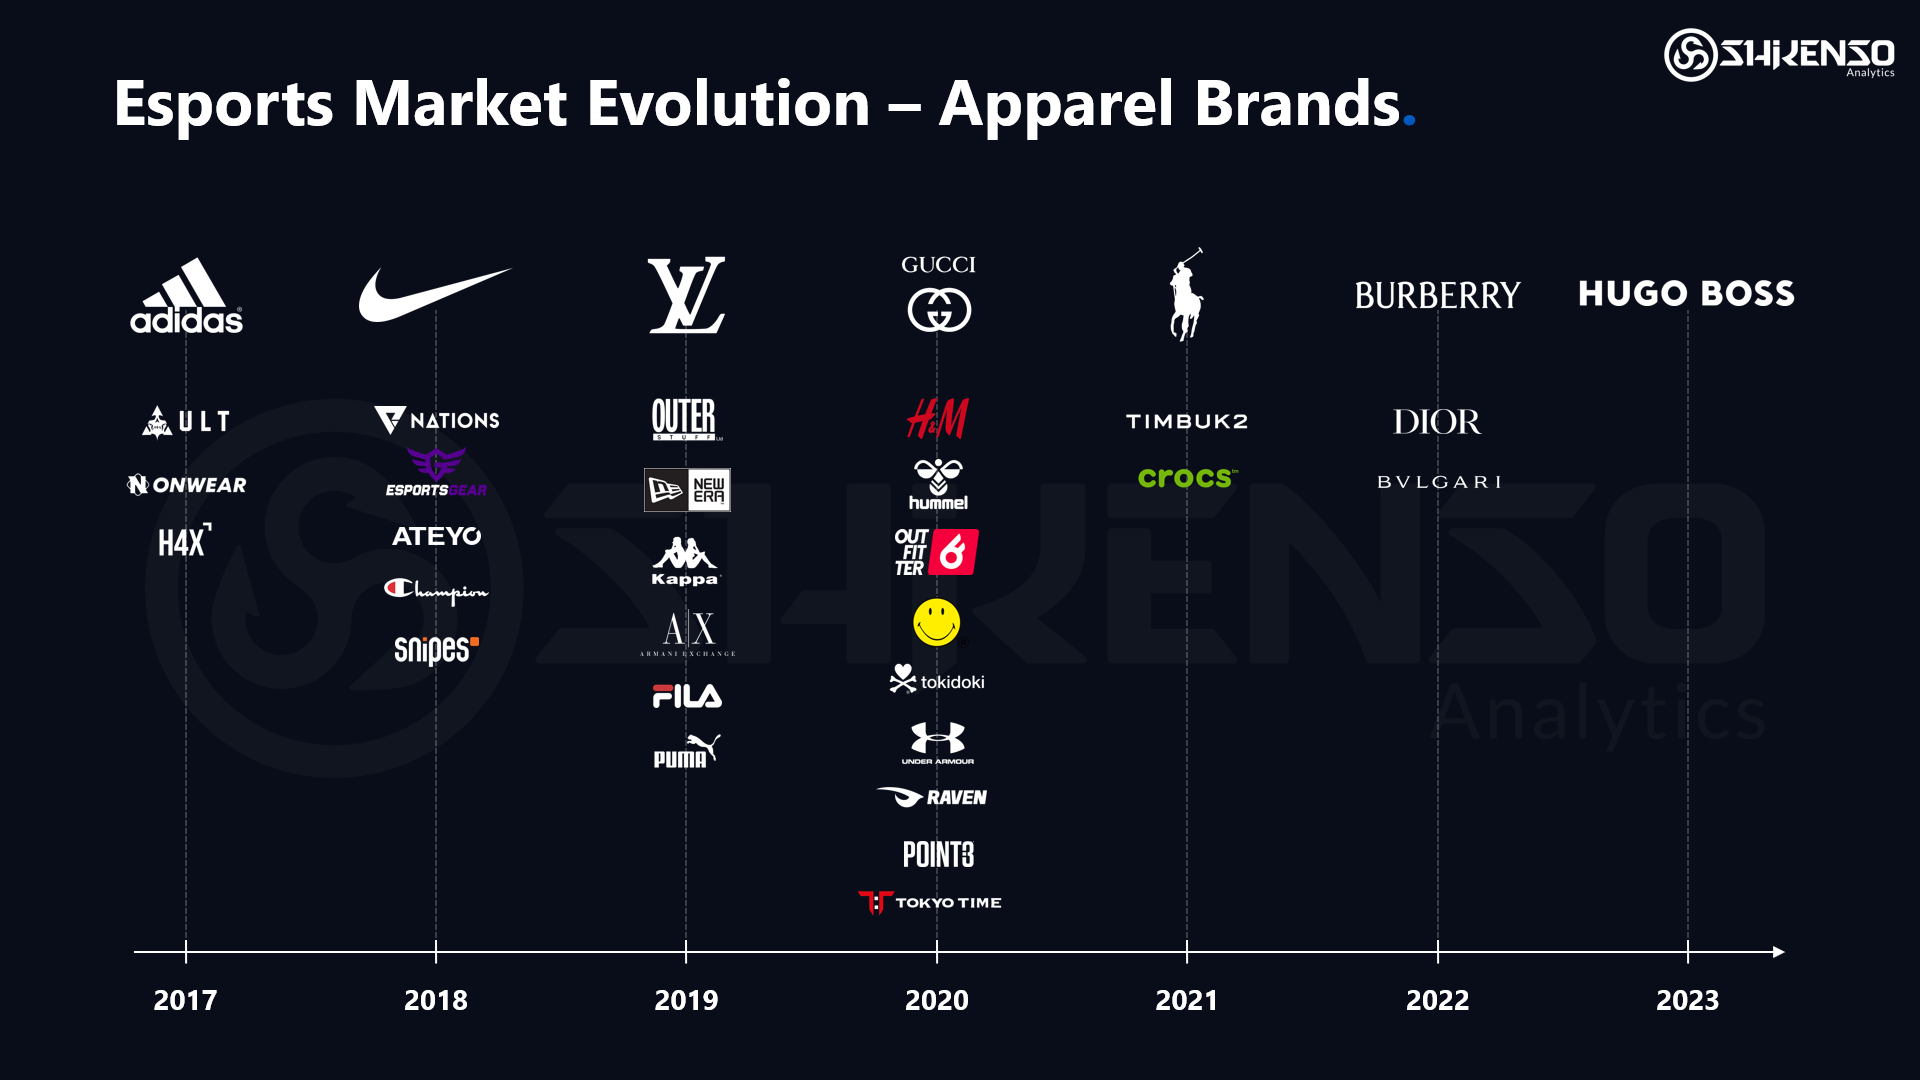 Graphic outlining the timeline of apparel brands entering the esports sponsorship market, illustrating the year-by-year evolution. Starting from 2017, it highlights key brands like Nike, Adidas, and Gucci. Each year shows a growing number of apparel companies engaging with esports, with significant moments such as Nike's partnership with the League of Legends Pro League in 2018 and Adidas sponsoring the G2 Esports team in 2019. The graphic uses arrows and distinct logos to indicate when each brand started its esports involvement, showcasing the increasing presence of the apparel industry in the esports sponsorship landscape over time.